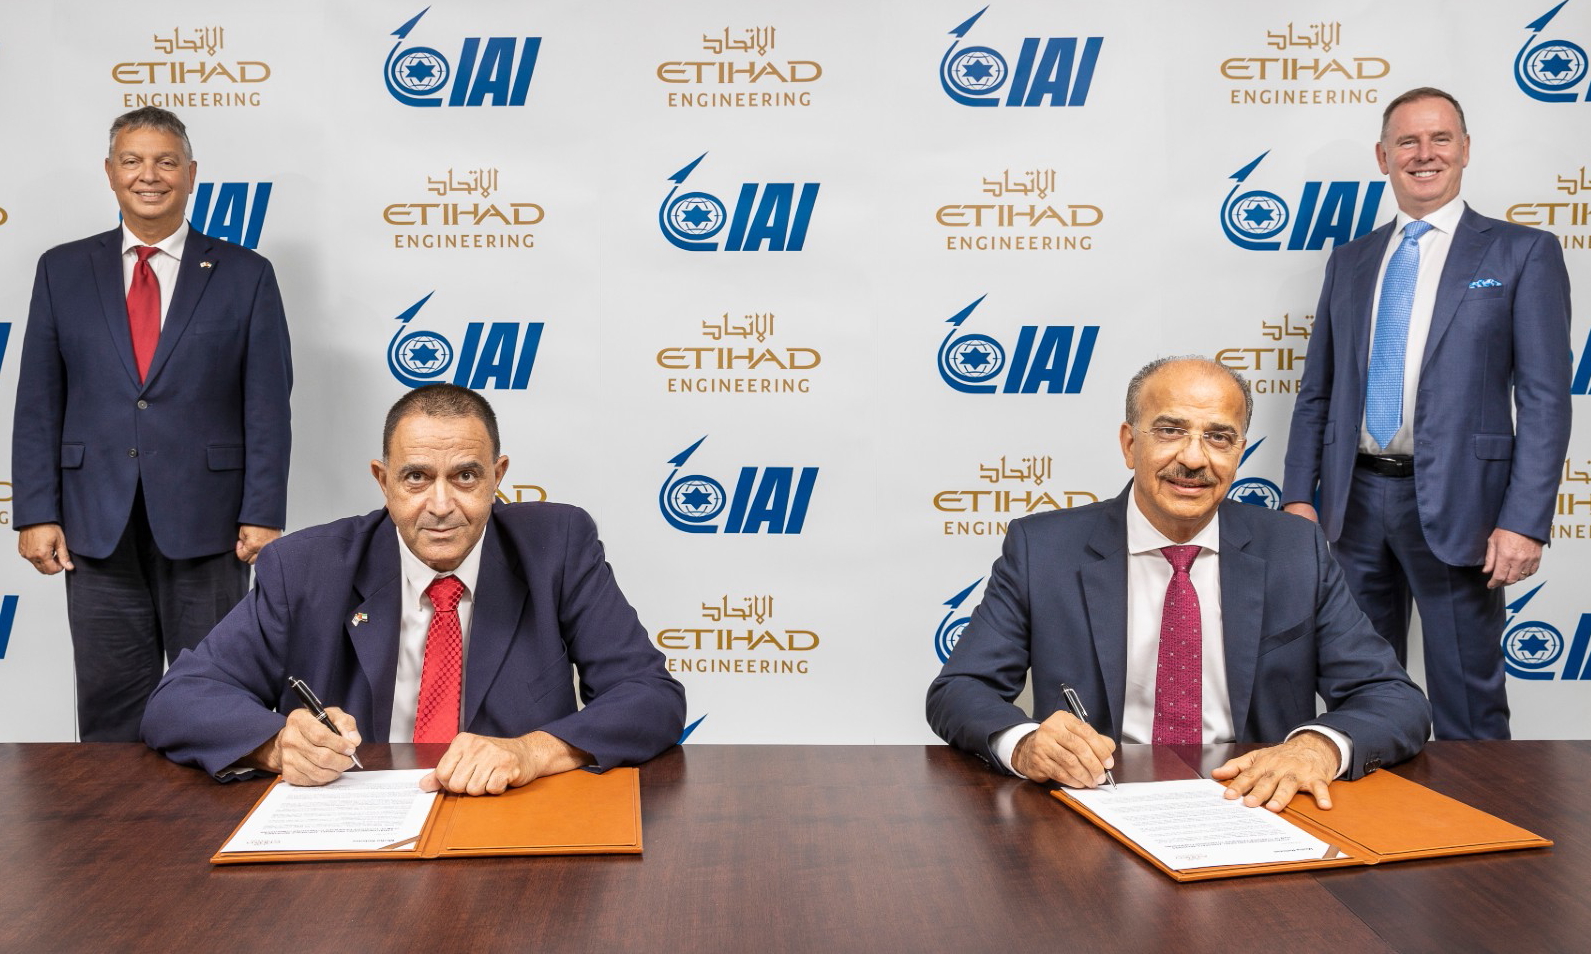 Etihad Engineering, one of the largest commercial aircraft MRO service providers in the Middle East, has signed a strategic partnership with Israel Aerospace Industries (IAI), to provide Passenger to Freighter (P2F) conversions on Boeing 777-300ERs Click to enlarge.